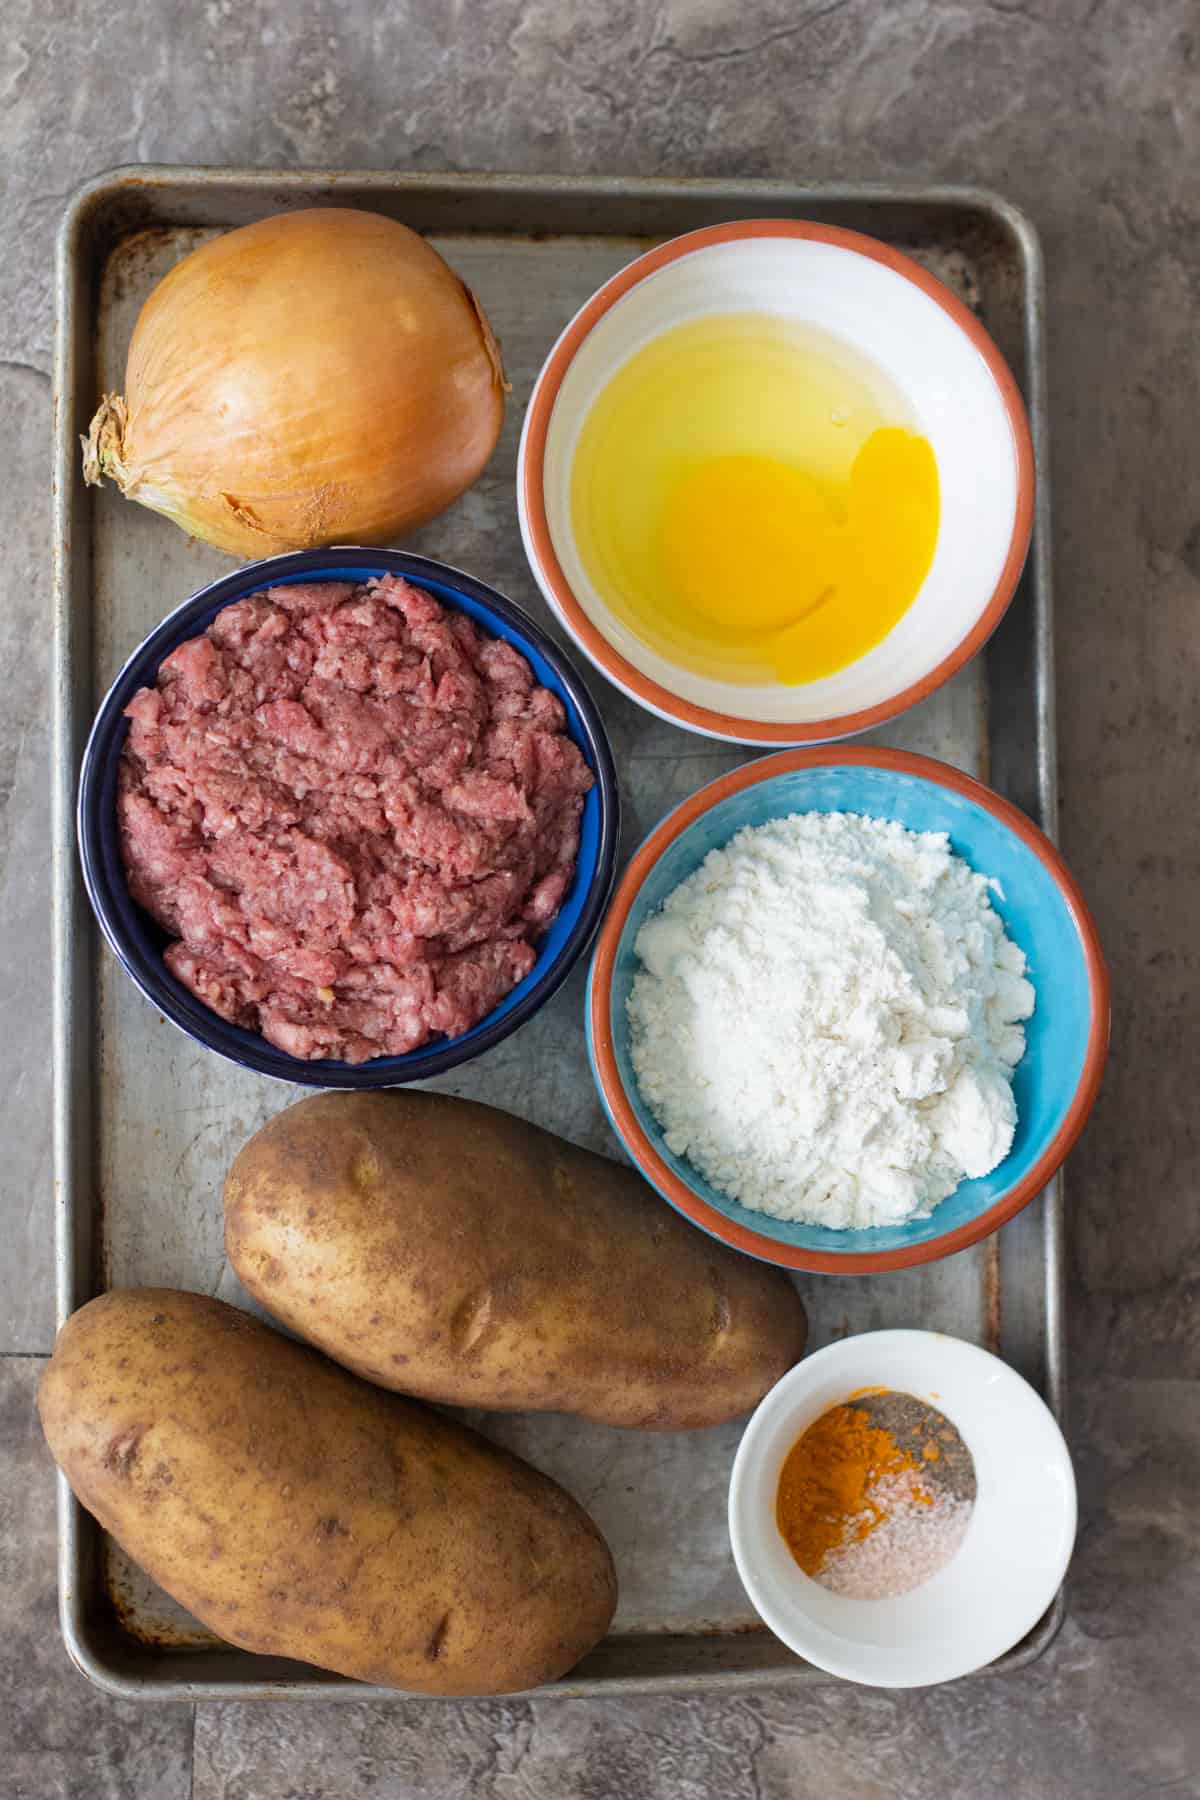 To make Kotlet, you need ground beef, potatoes, onion, egg, spices and flour. 